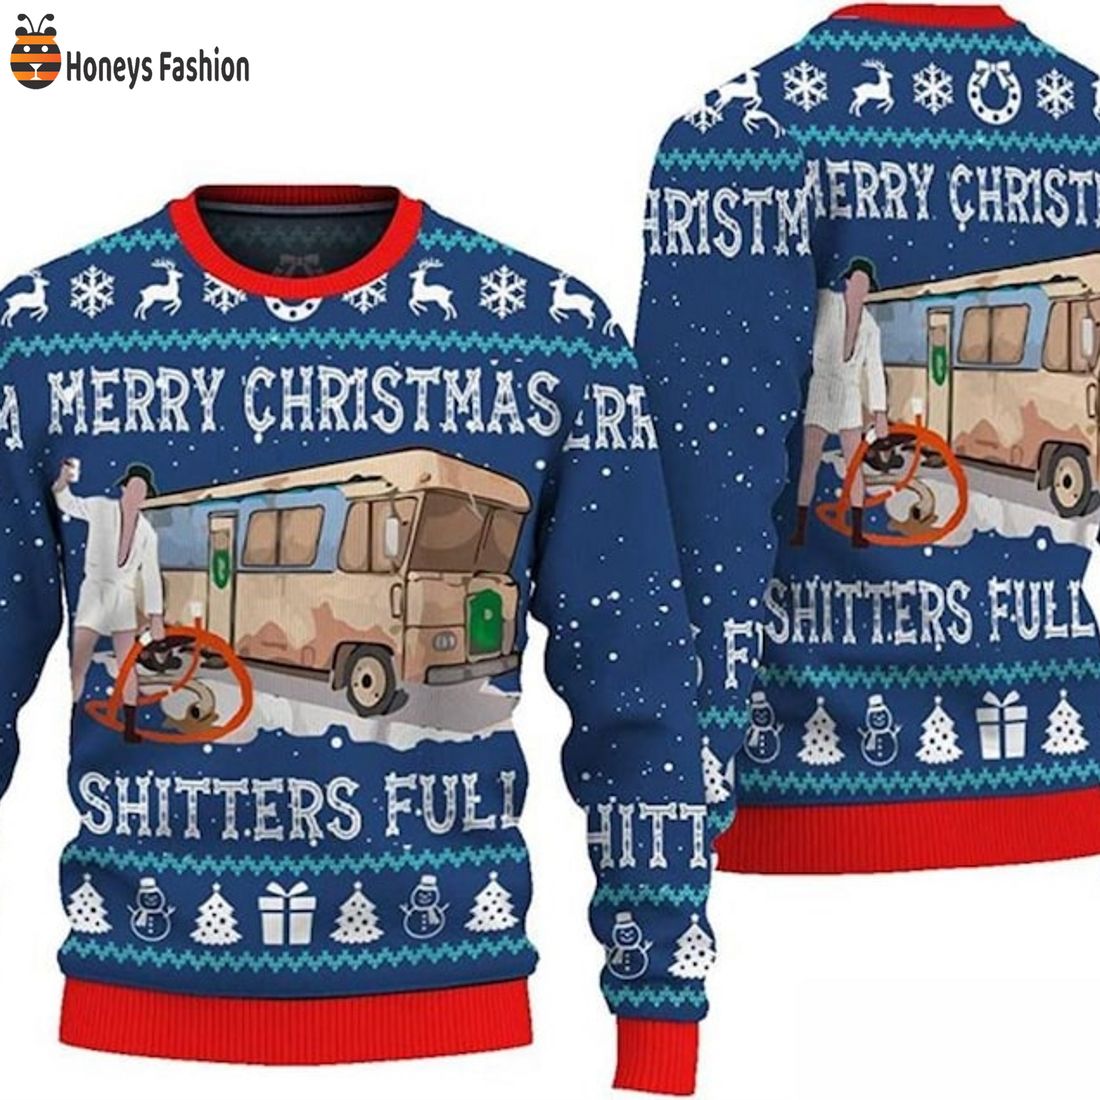 PRODUCT Shitter’s Full Clark Christmas Ugly Sweater